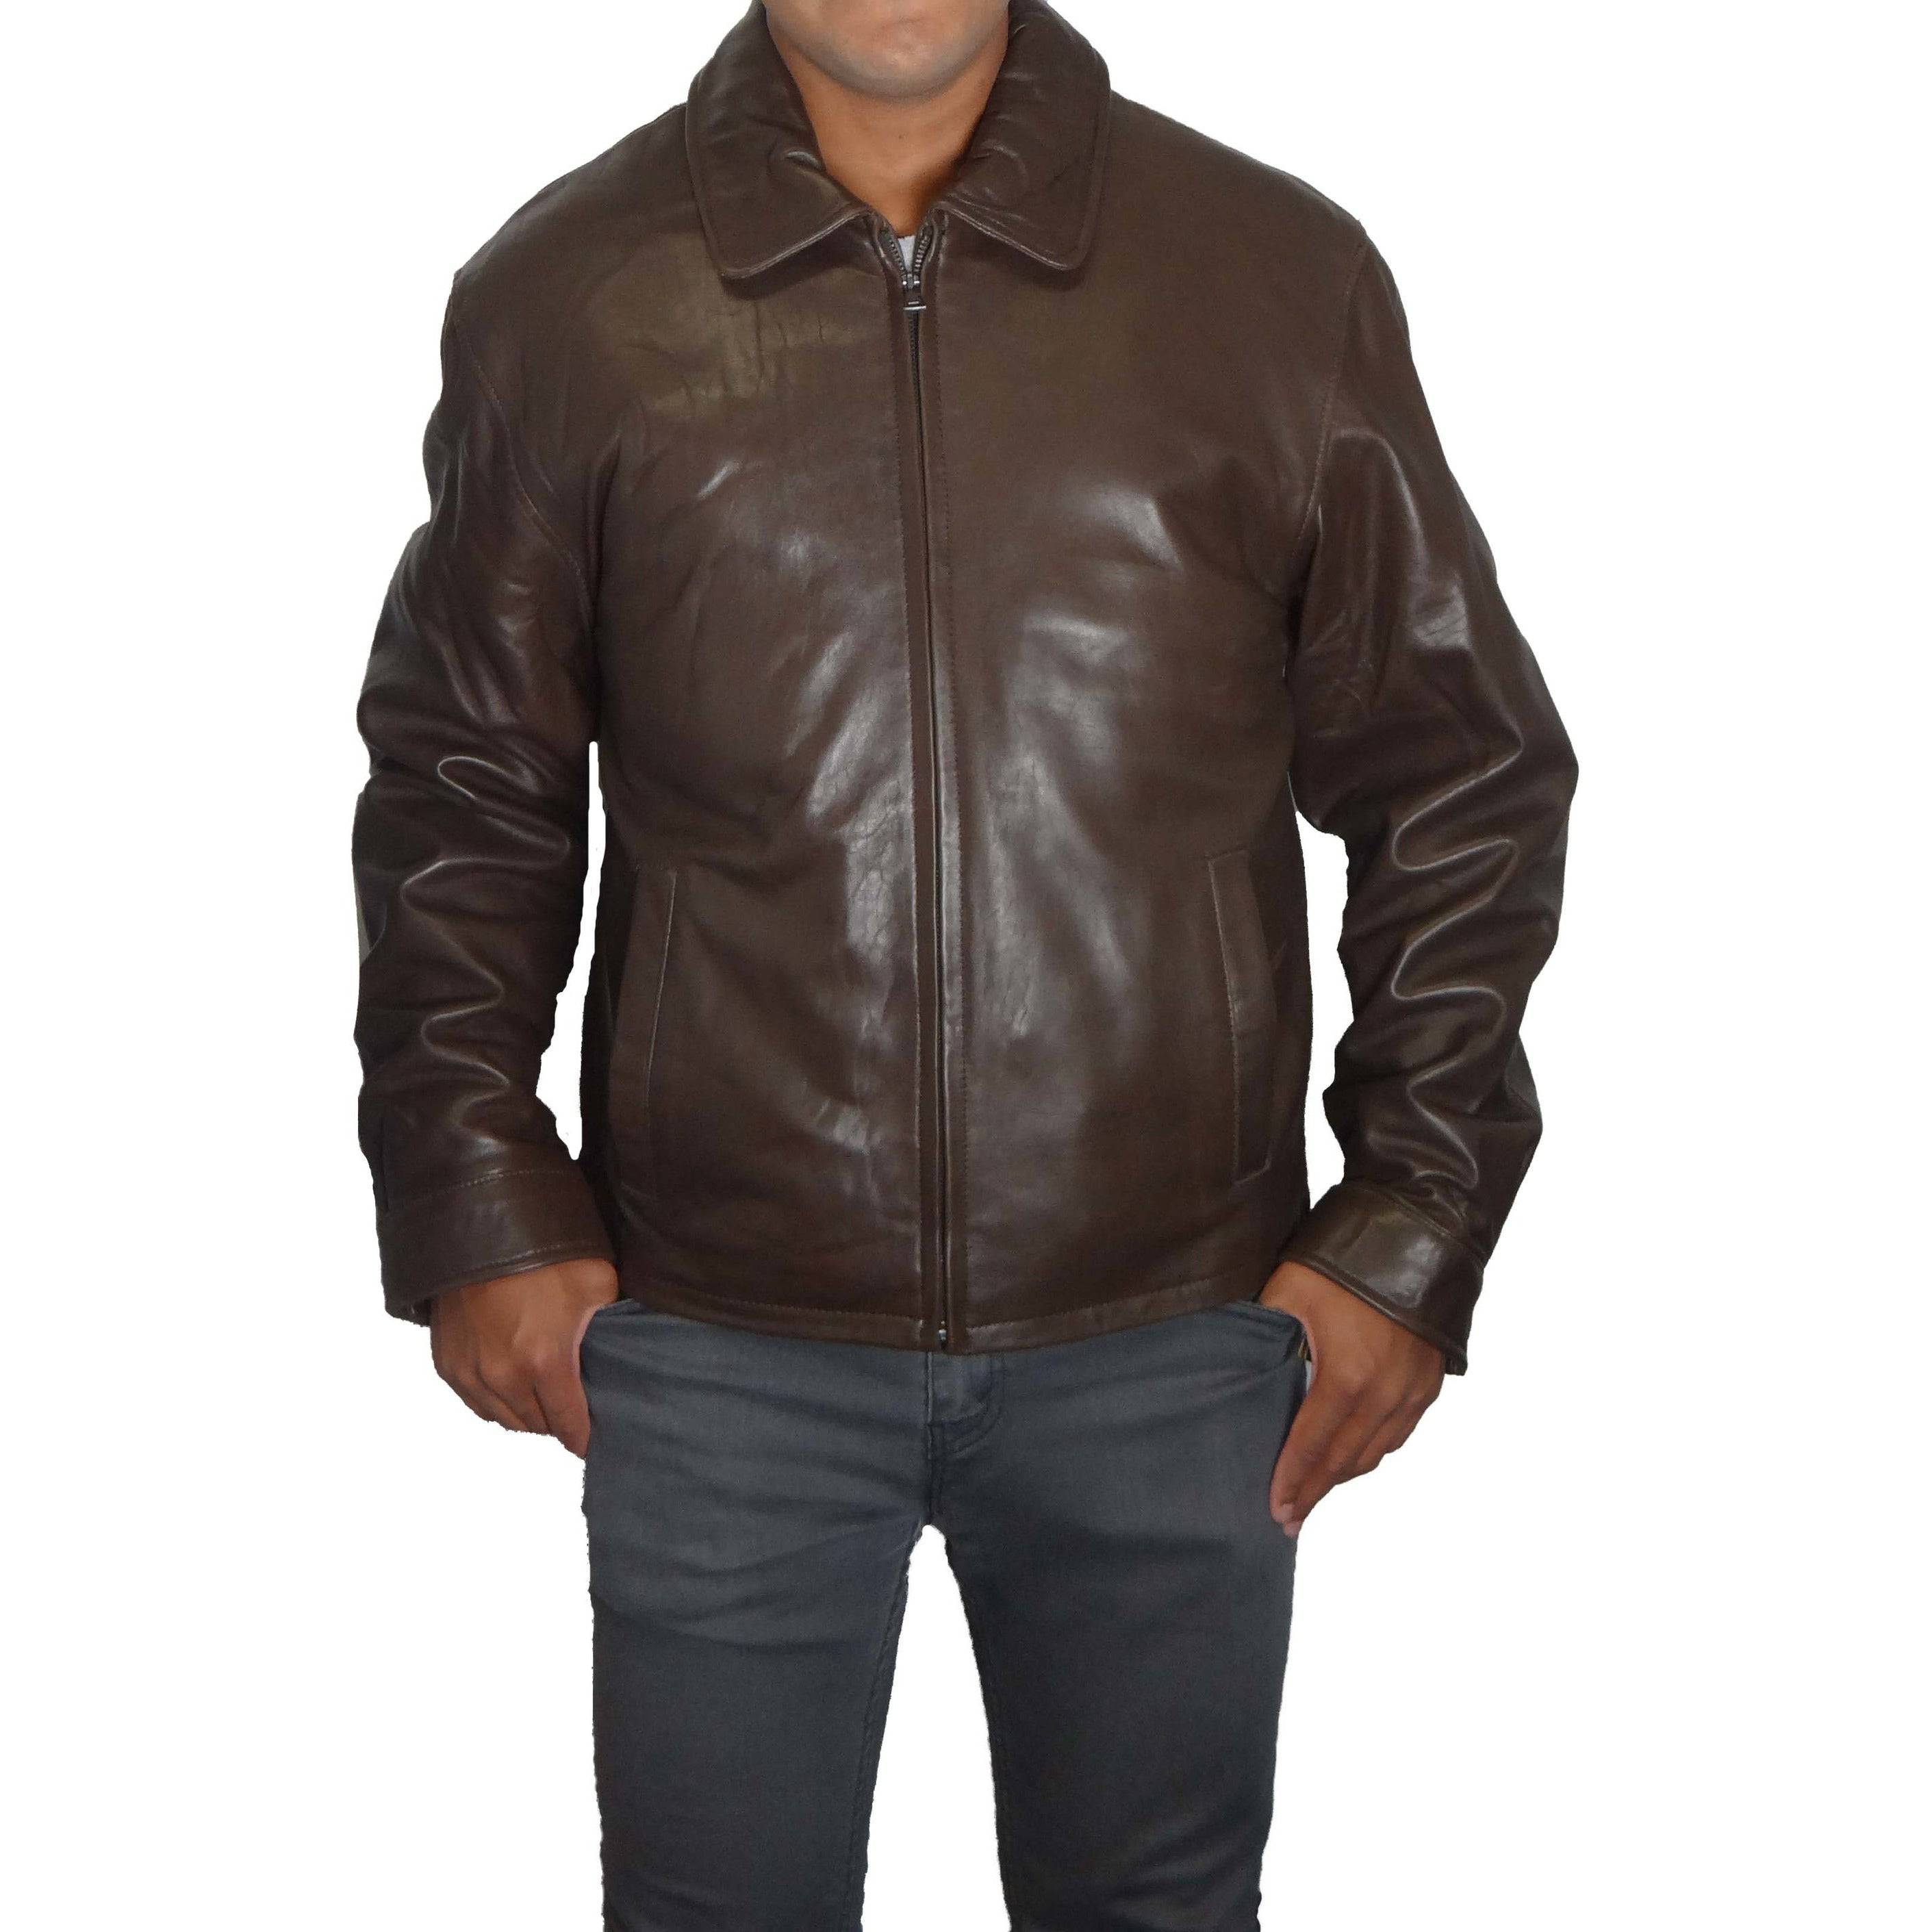 Knoles & Carter Men's Zip Front Leather Jacket – Zooloo Leather